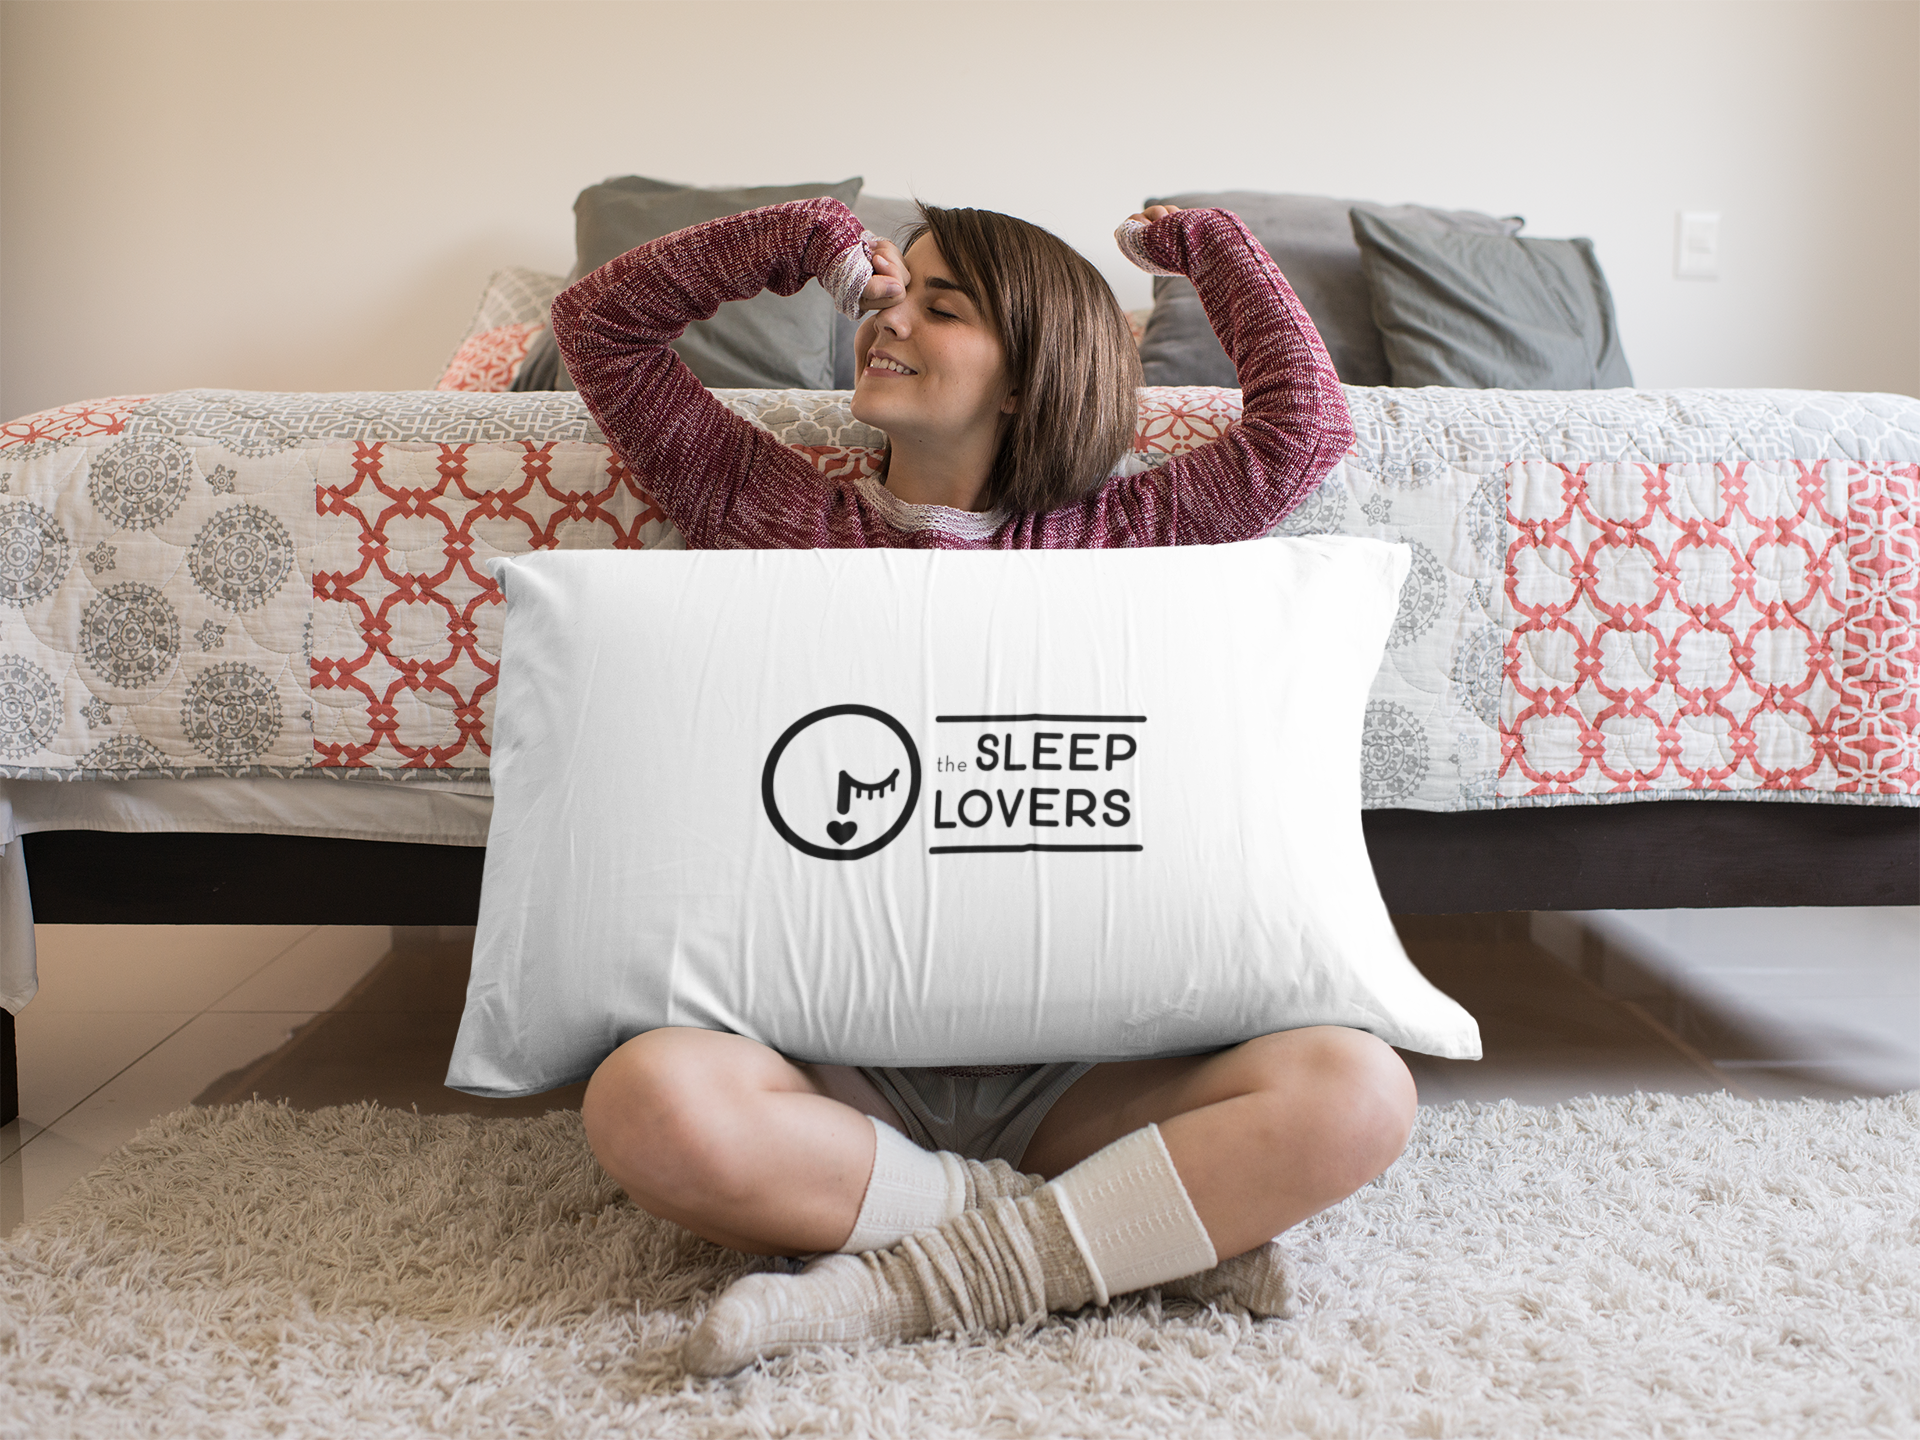 young-girl-waking-up-sitting-down-with-a-big-pillow-mockup-a14949